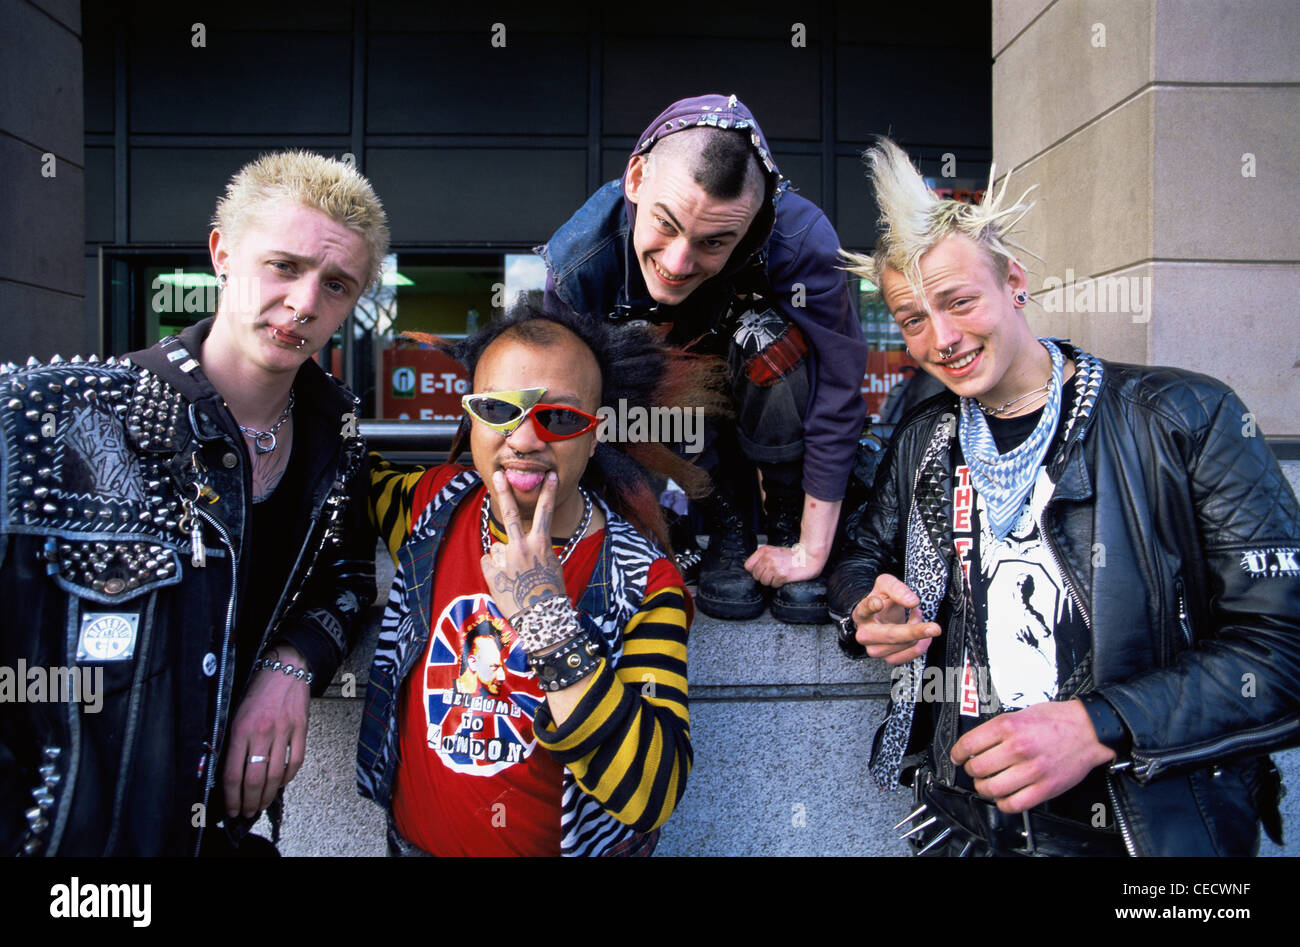 London punk rockers Stock Photos and Images